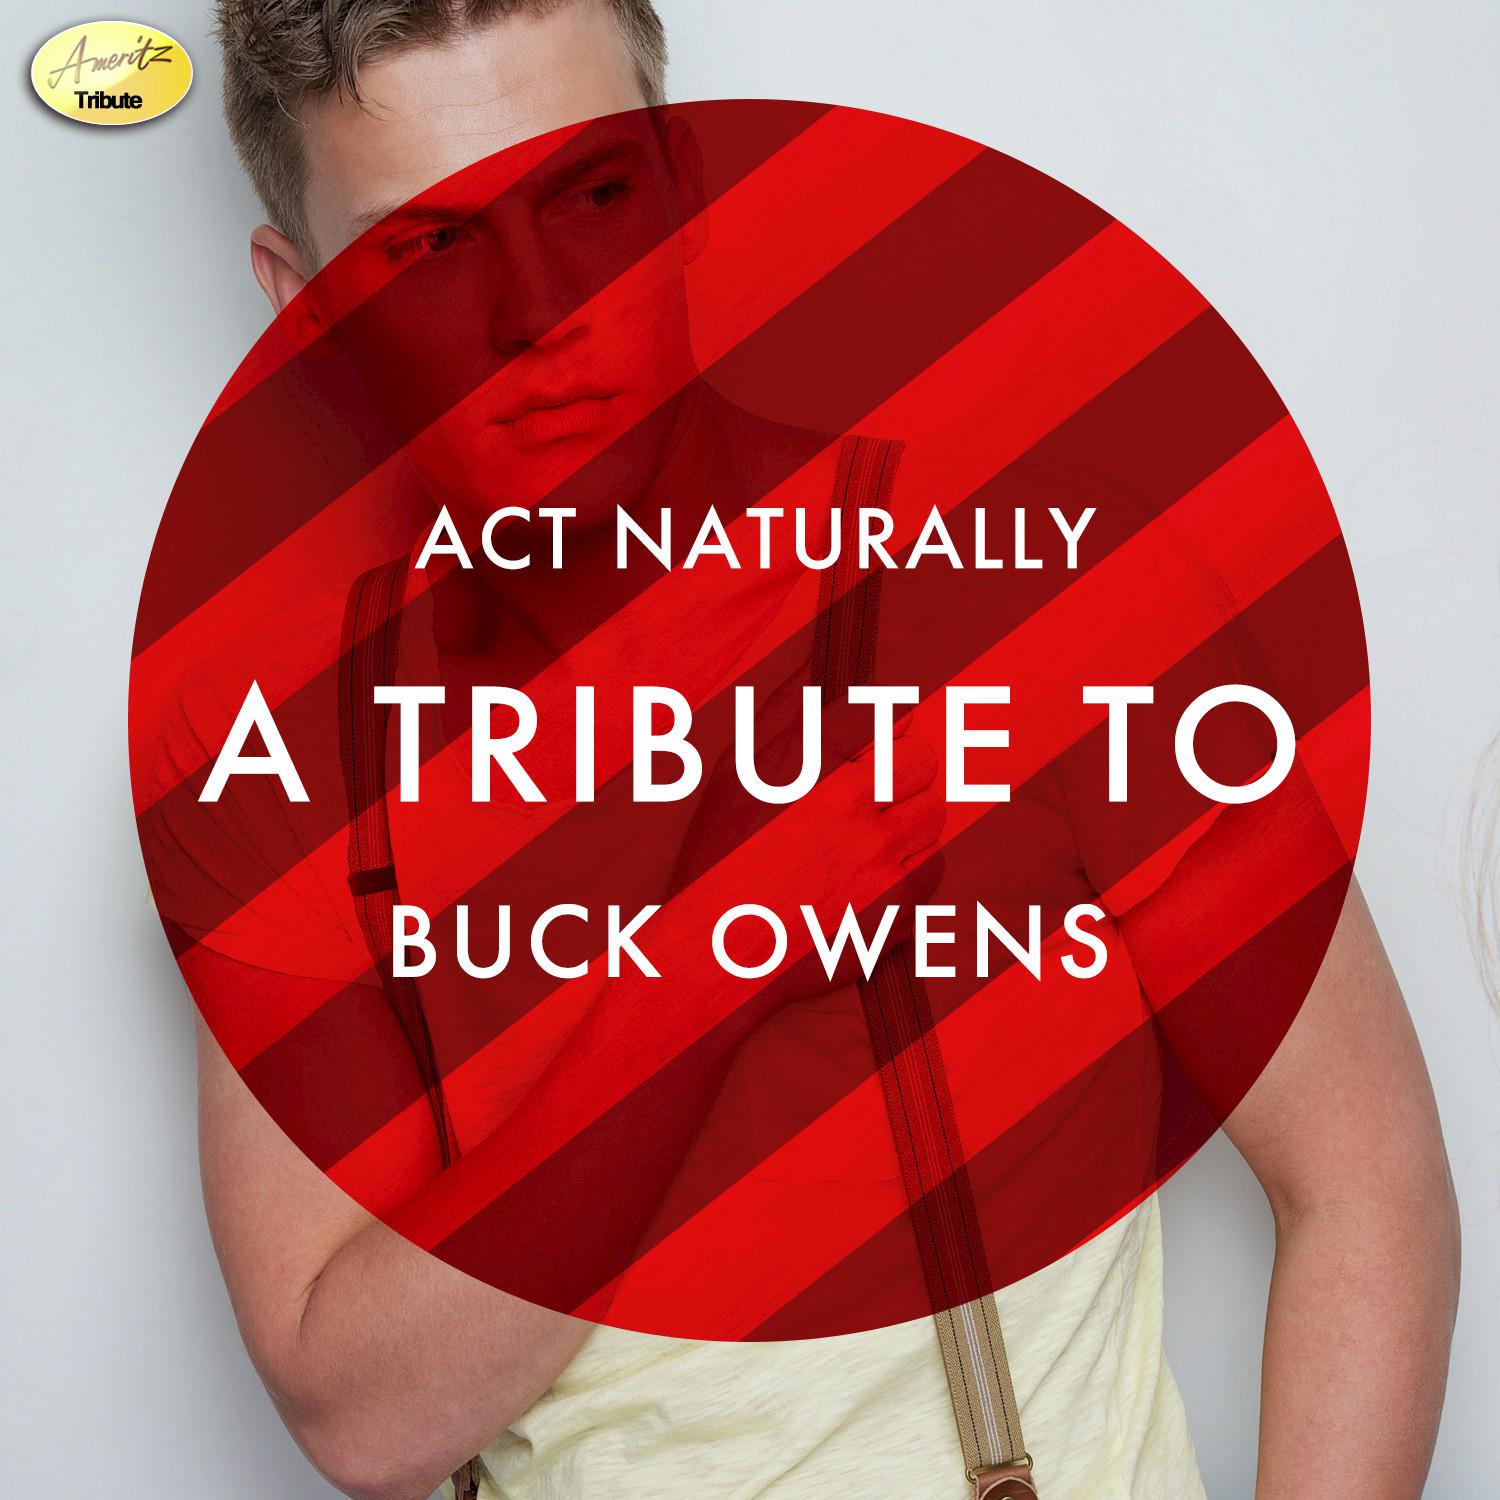 Act Naturally - A Tribute to Buck Owens